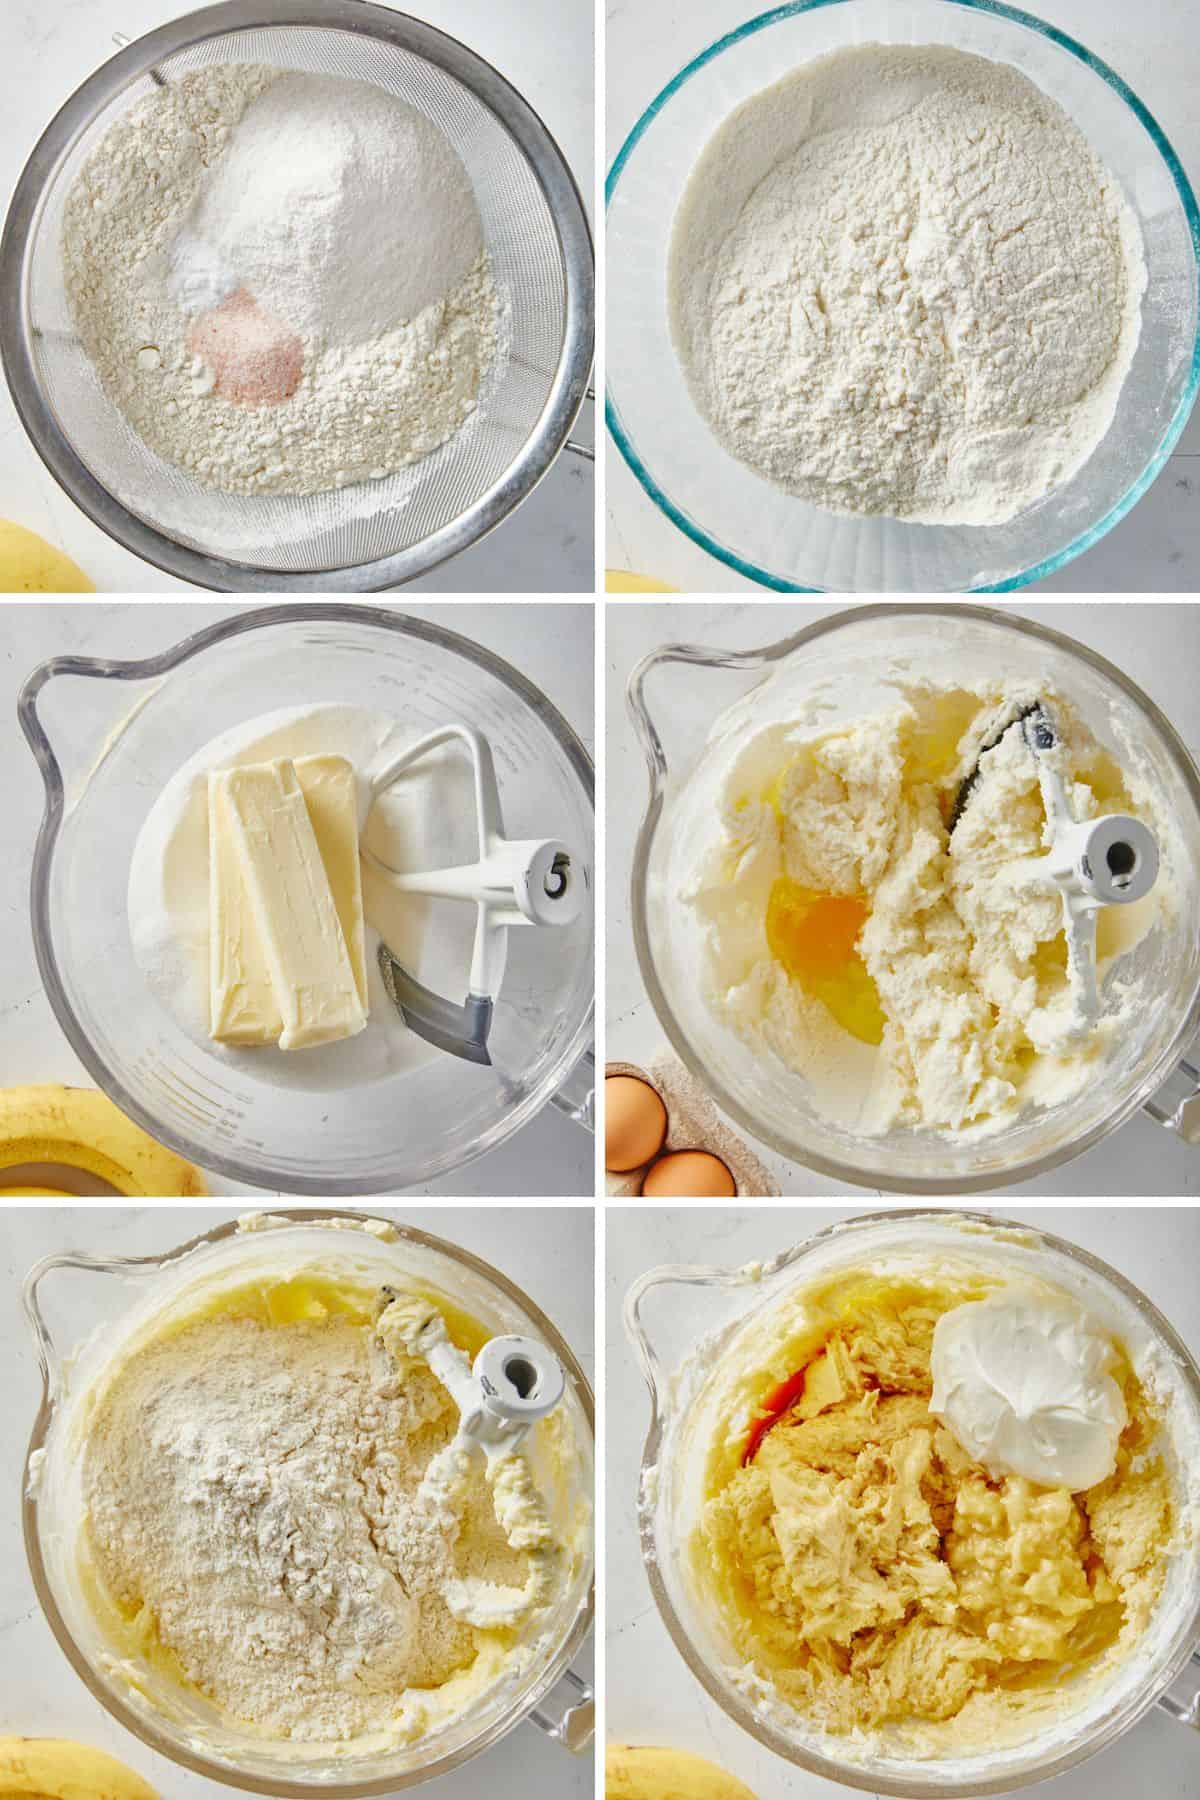 A collage showing the steps to make banana pudding pound cake with sifting the dry ingredients for the batter, and mixing the batter